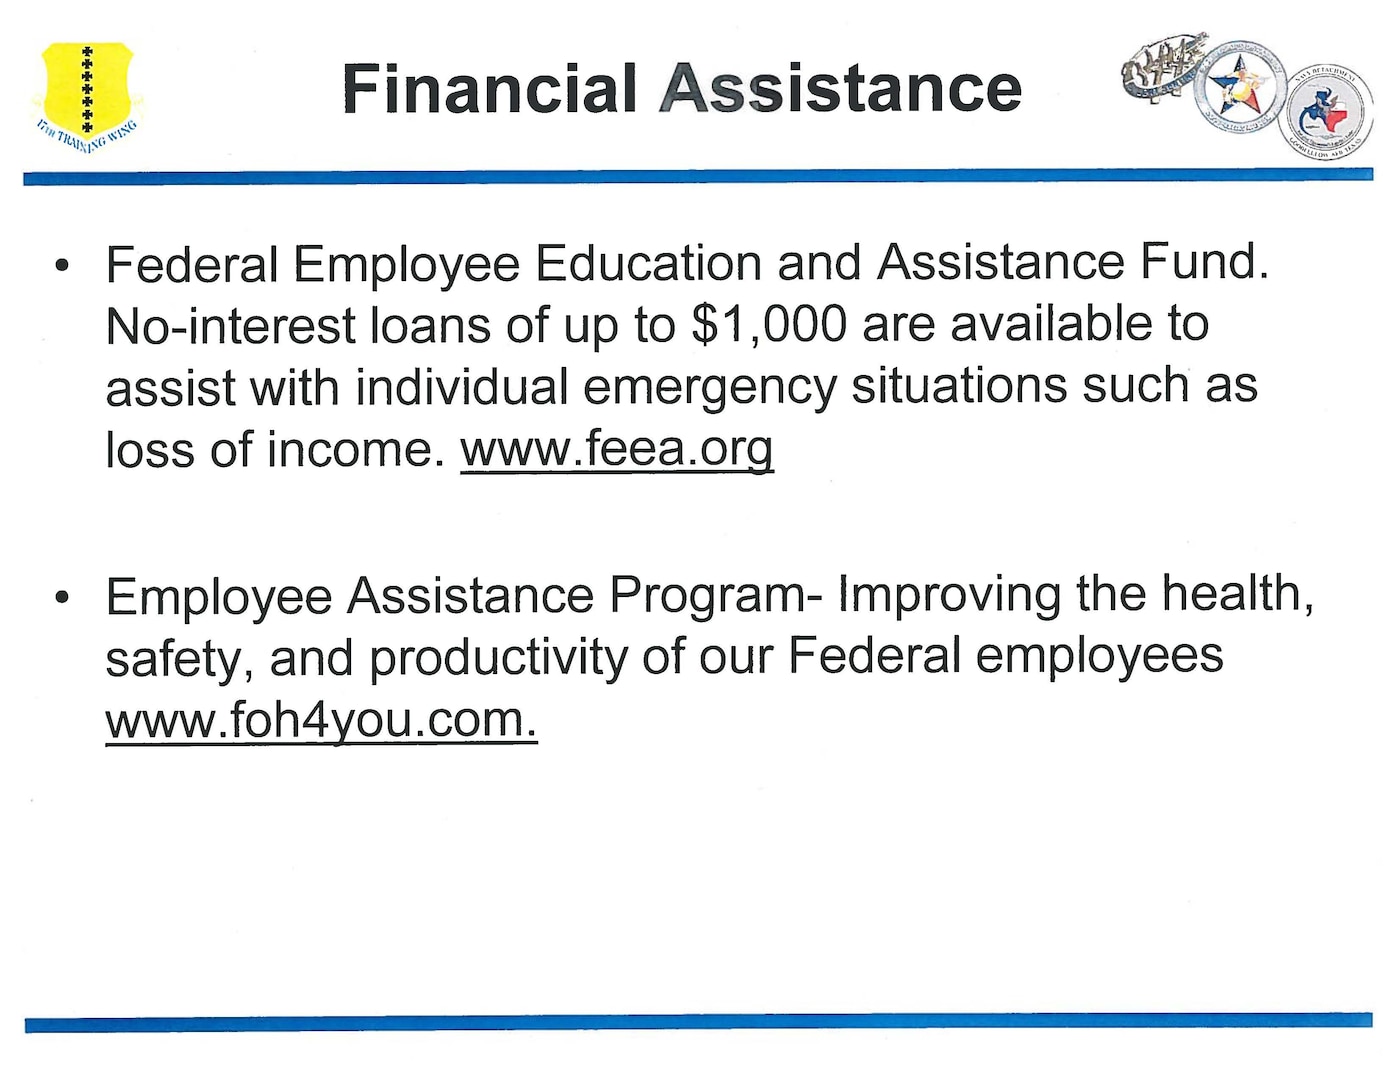 The Federal Employee Education and Assistance Fund. No interest loans of up to $1,000 are available to assist with individual emergency situations such as loss of income.